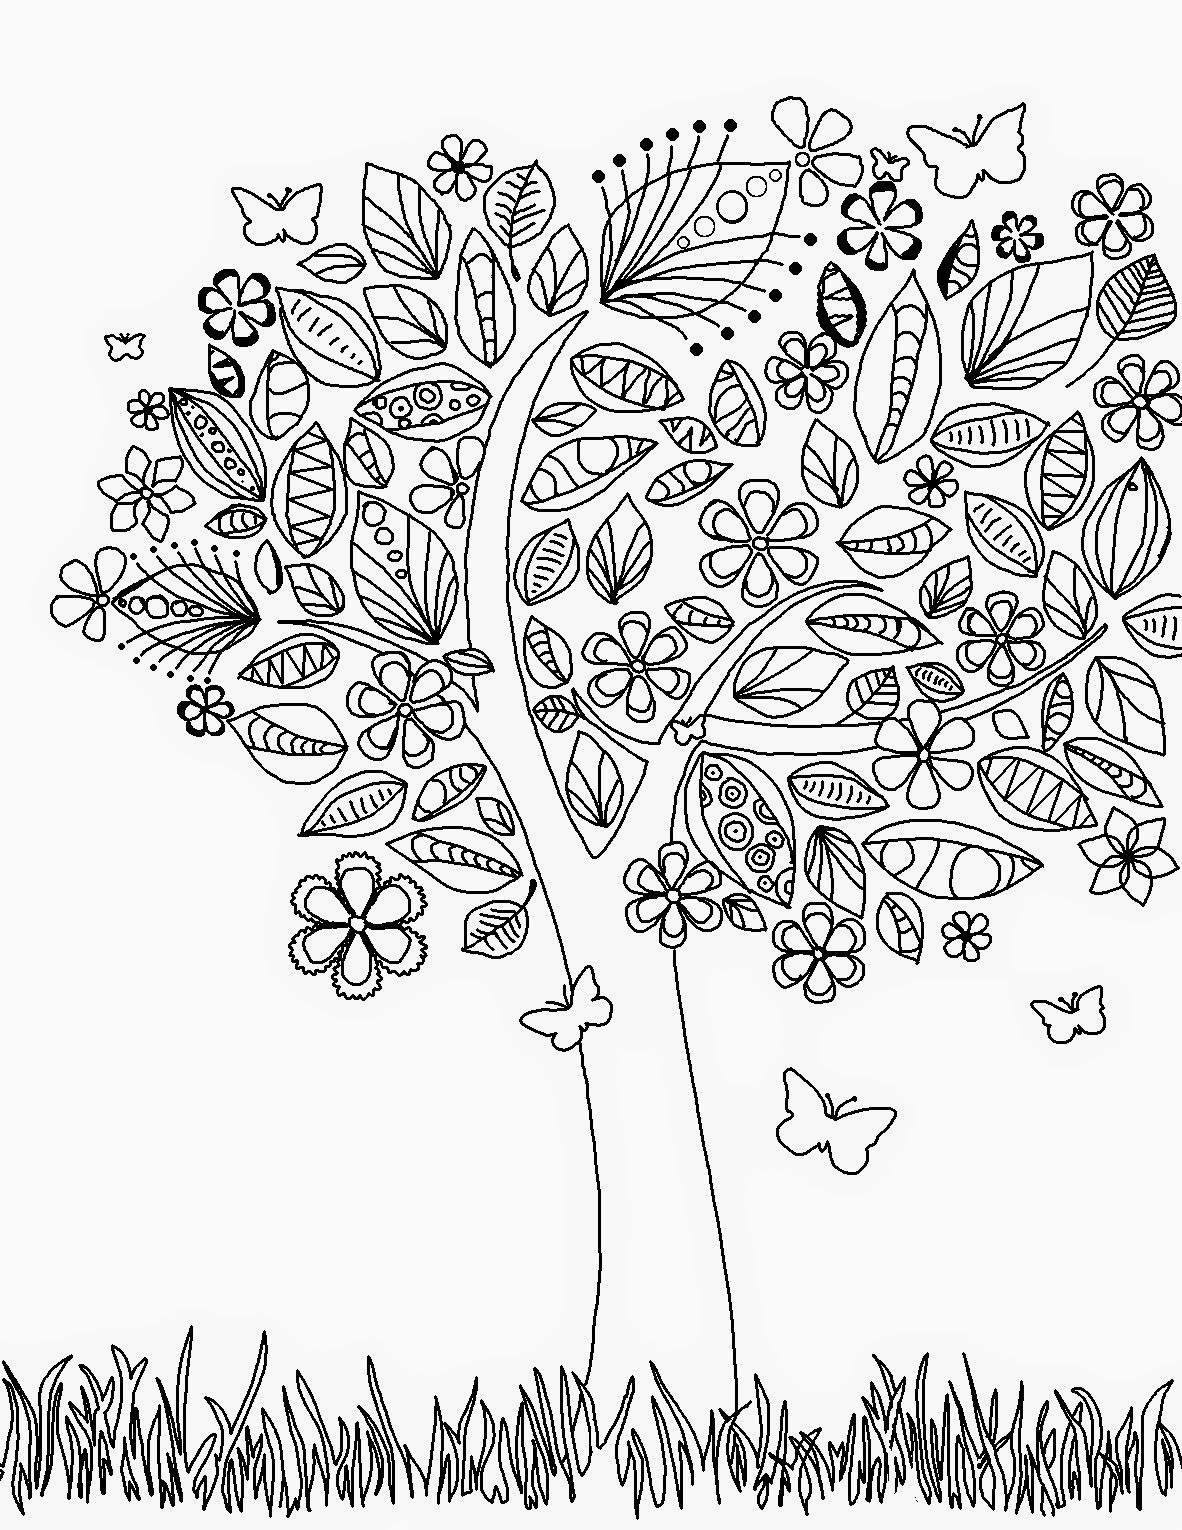 Coloring Sheets For Teenage Girls
 Coloring Sheet for Kids – Coloring Pages Blog